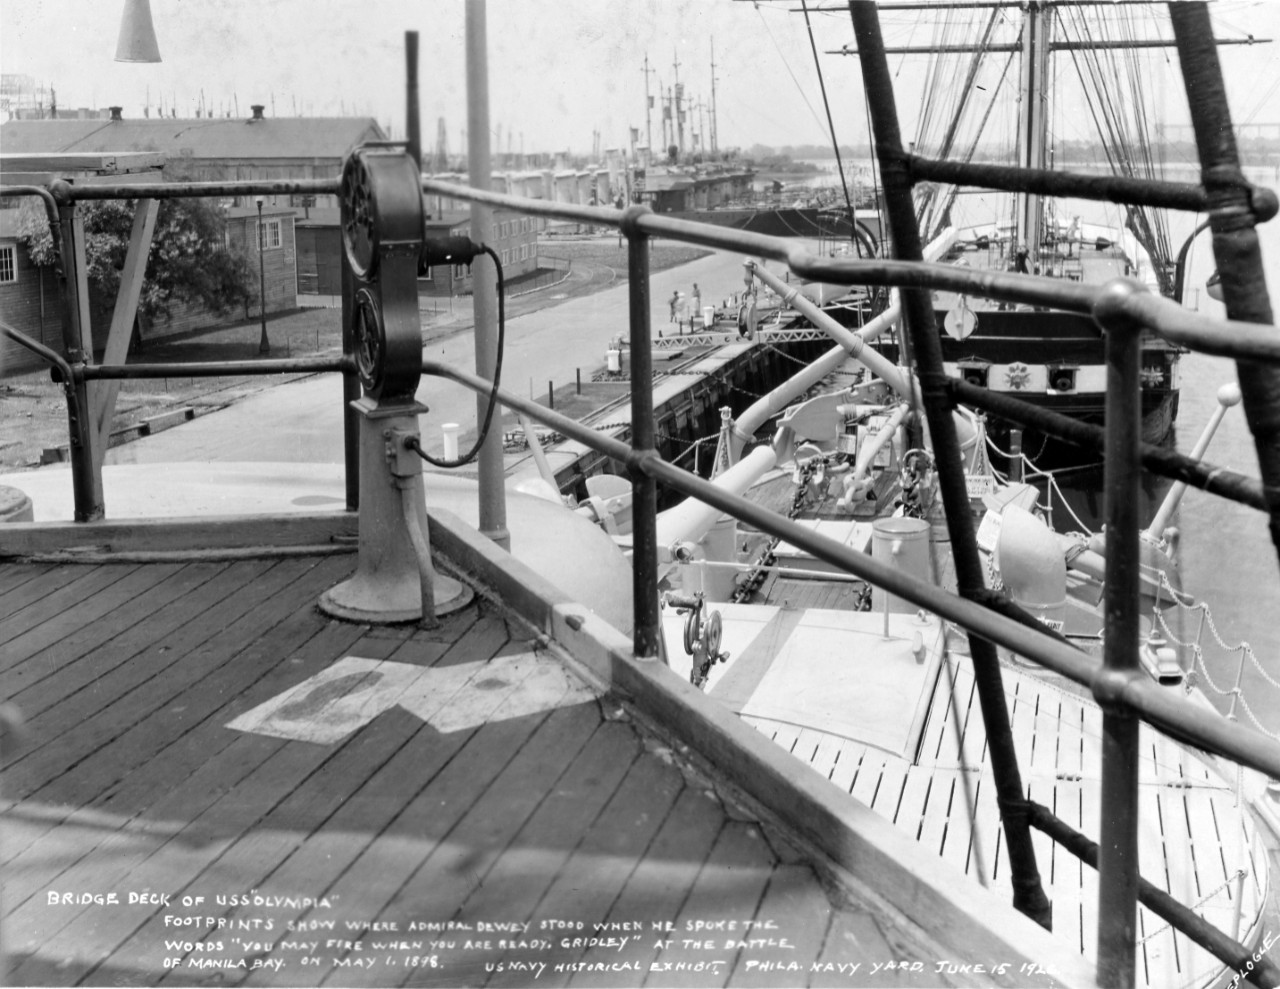 USS OLYMPIA (CL-15), view on the bridge deck, while she was on exhibit at the Philadelphia Navy Yard. 